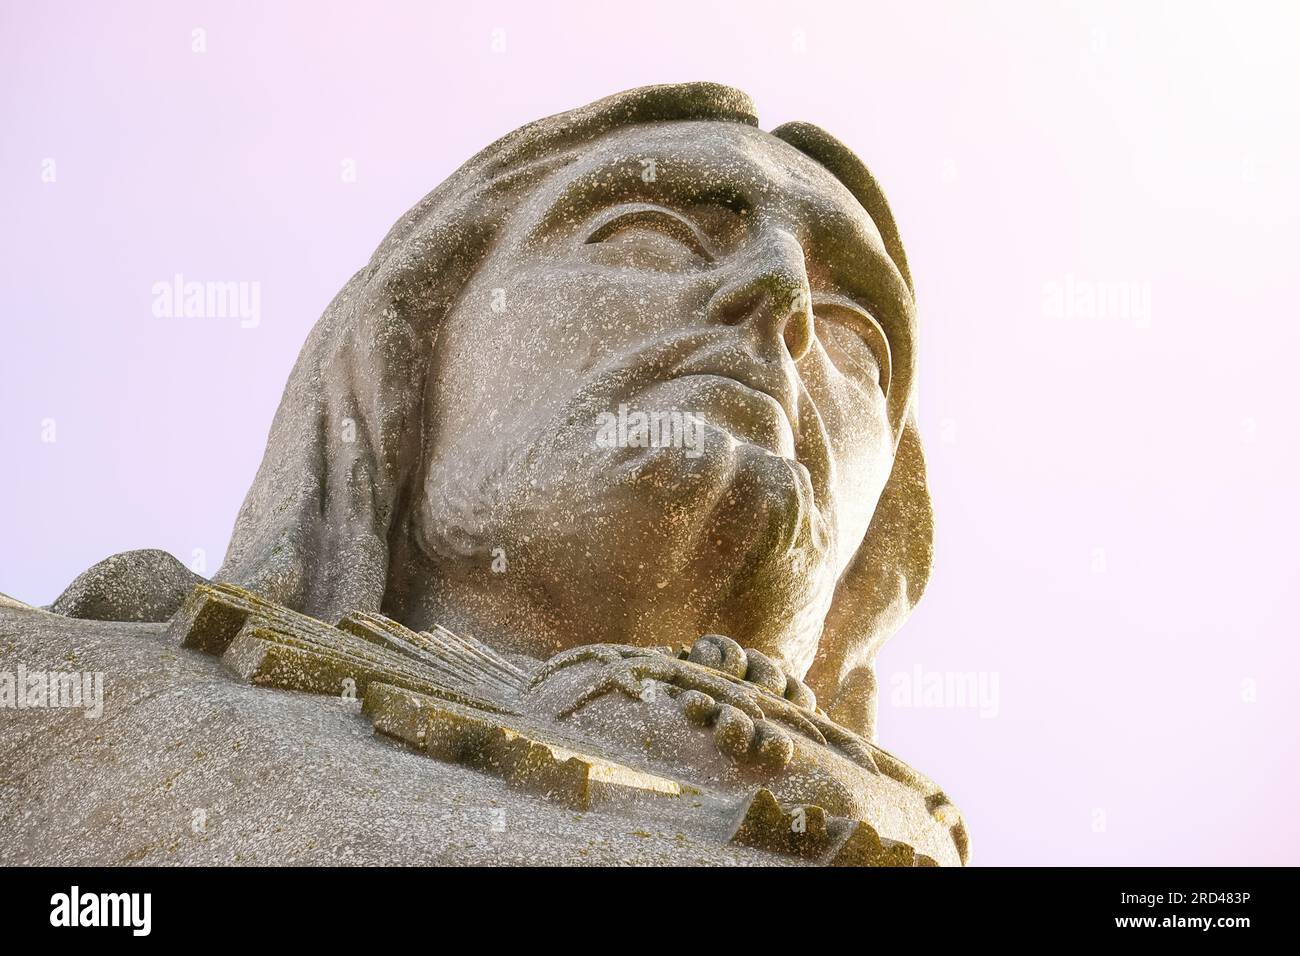 Christ the King, Cristo Rei statue in Almada, Lisbon. Famous Jesus Christ monument in the capital city of Portugal. Stock Photo